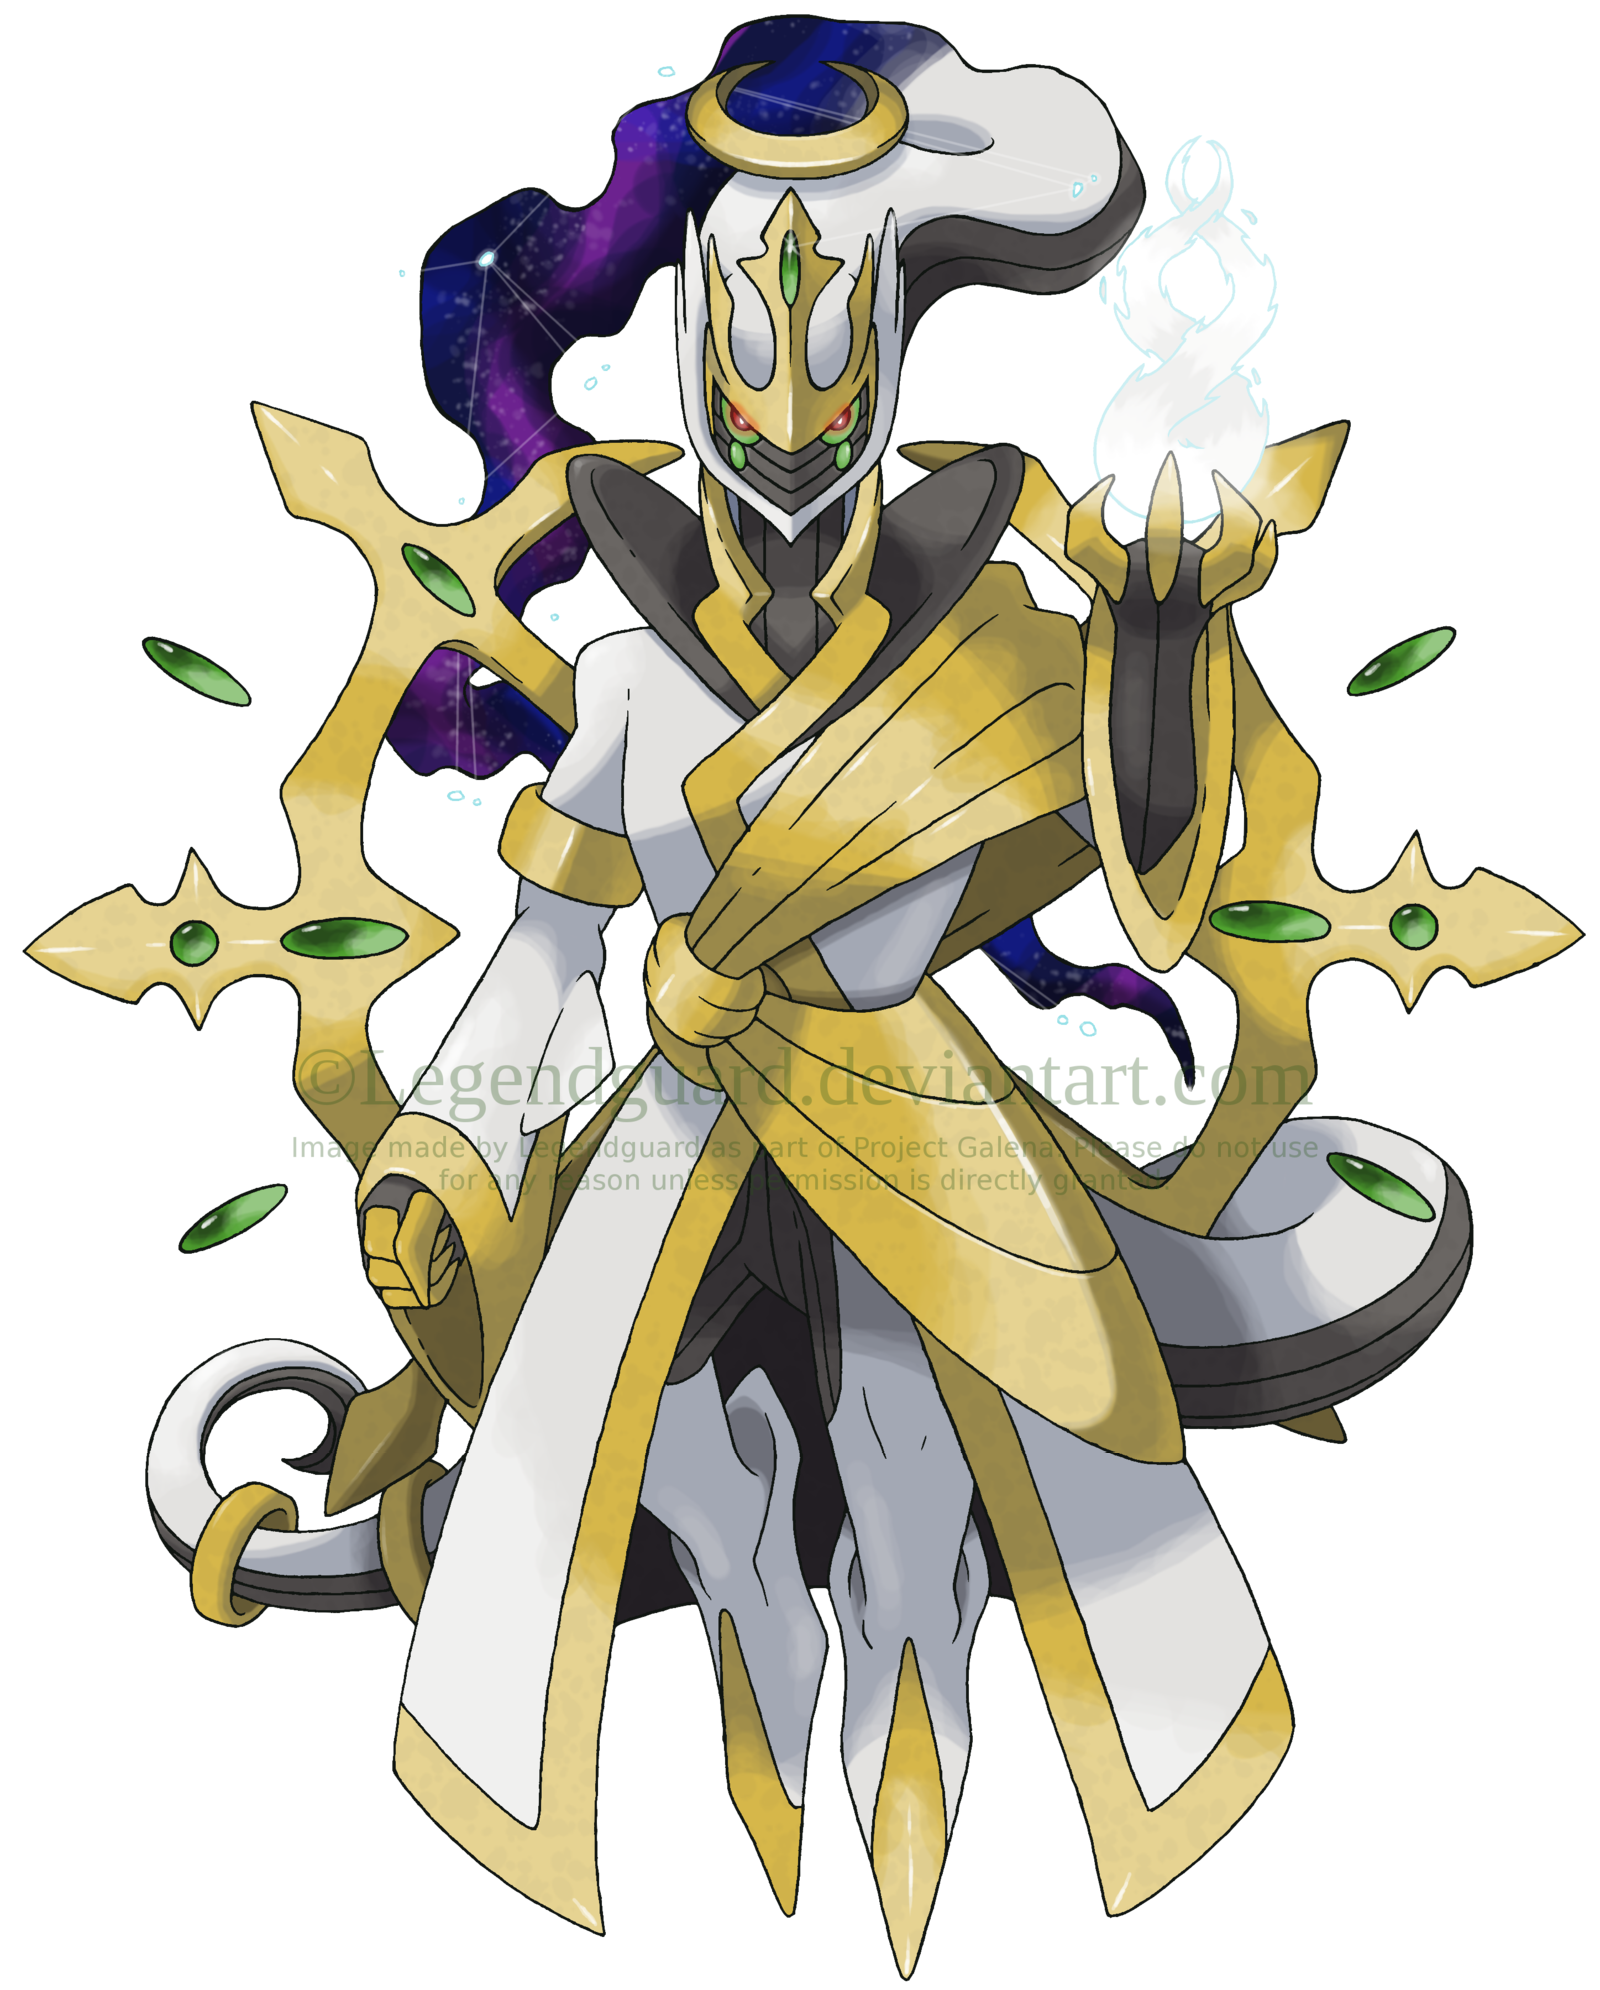 Image Arceus Megapng Vs Battles Wiki Fandom Powered By Wikia